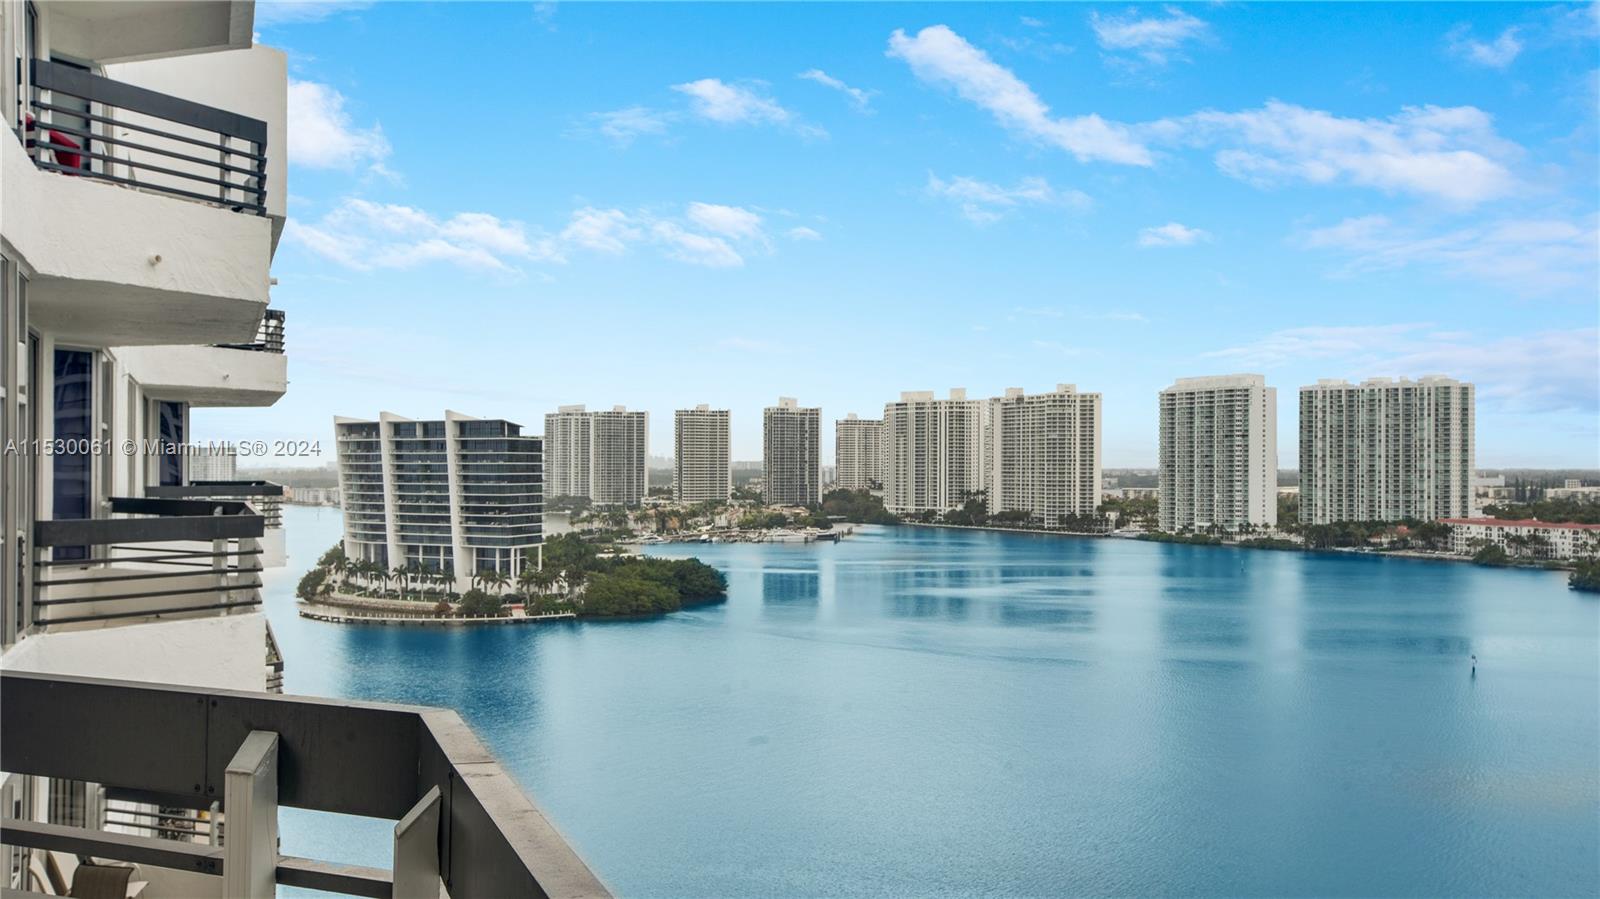 Beautiful and spacious Lower Penthouse unit at Mystic Pointe. Come to live close to Aventura Mall, the beaches, excellent restaurants and much more.
This furnished 2 bedrooms, 2bathrooms has everything you are looking for, modern furniture, big walk-in closet, remodeled kitchen, new appliances and the most amazing view!
24hr for showings